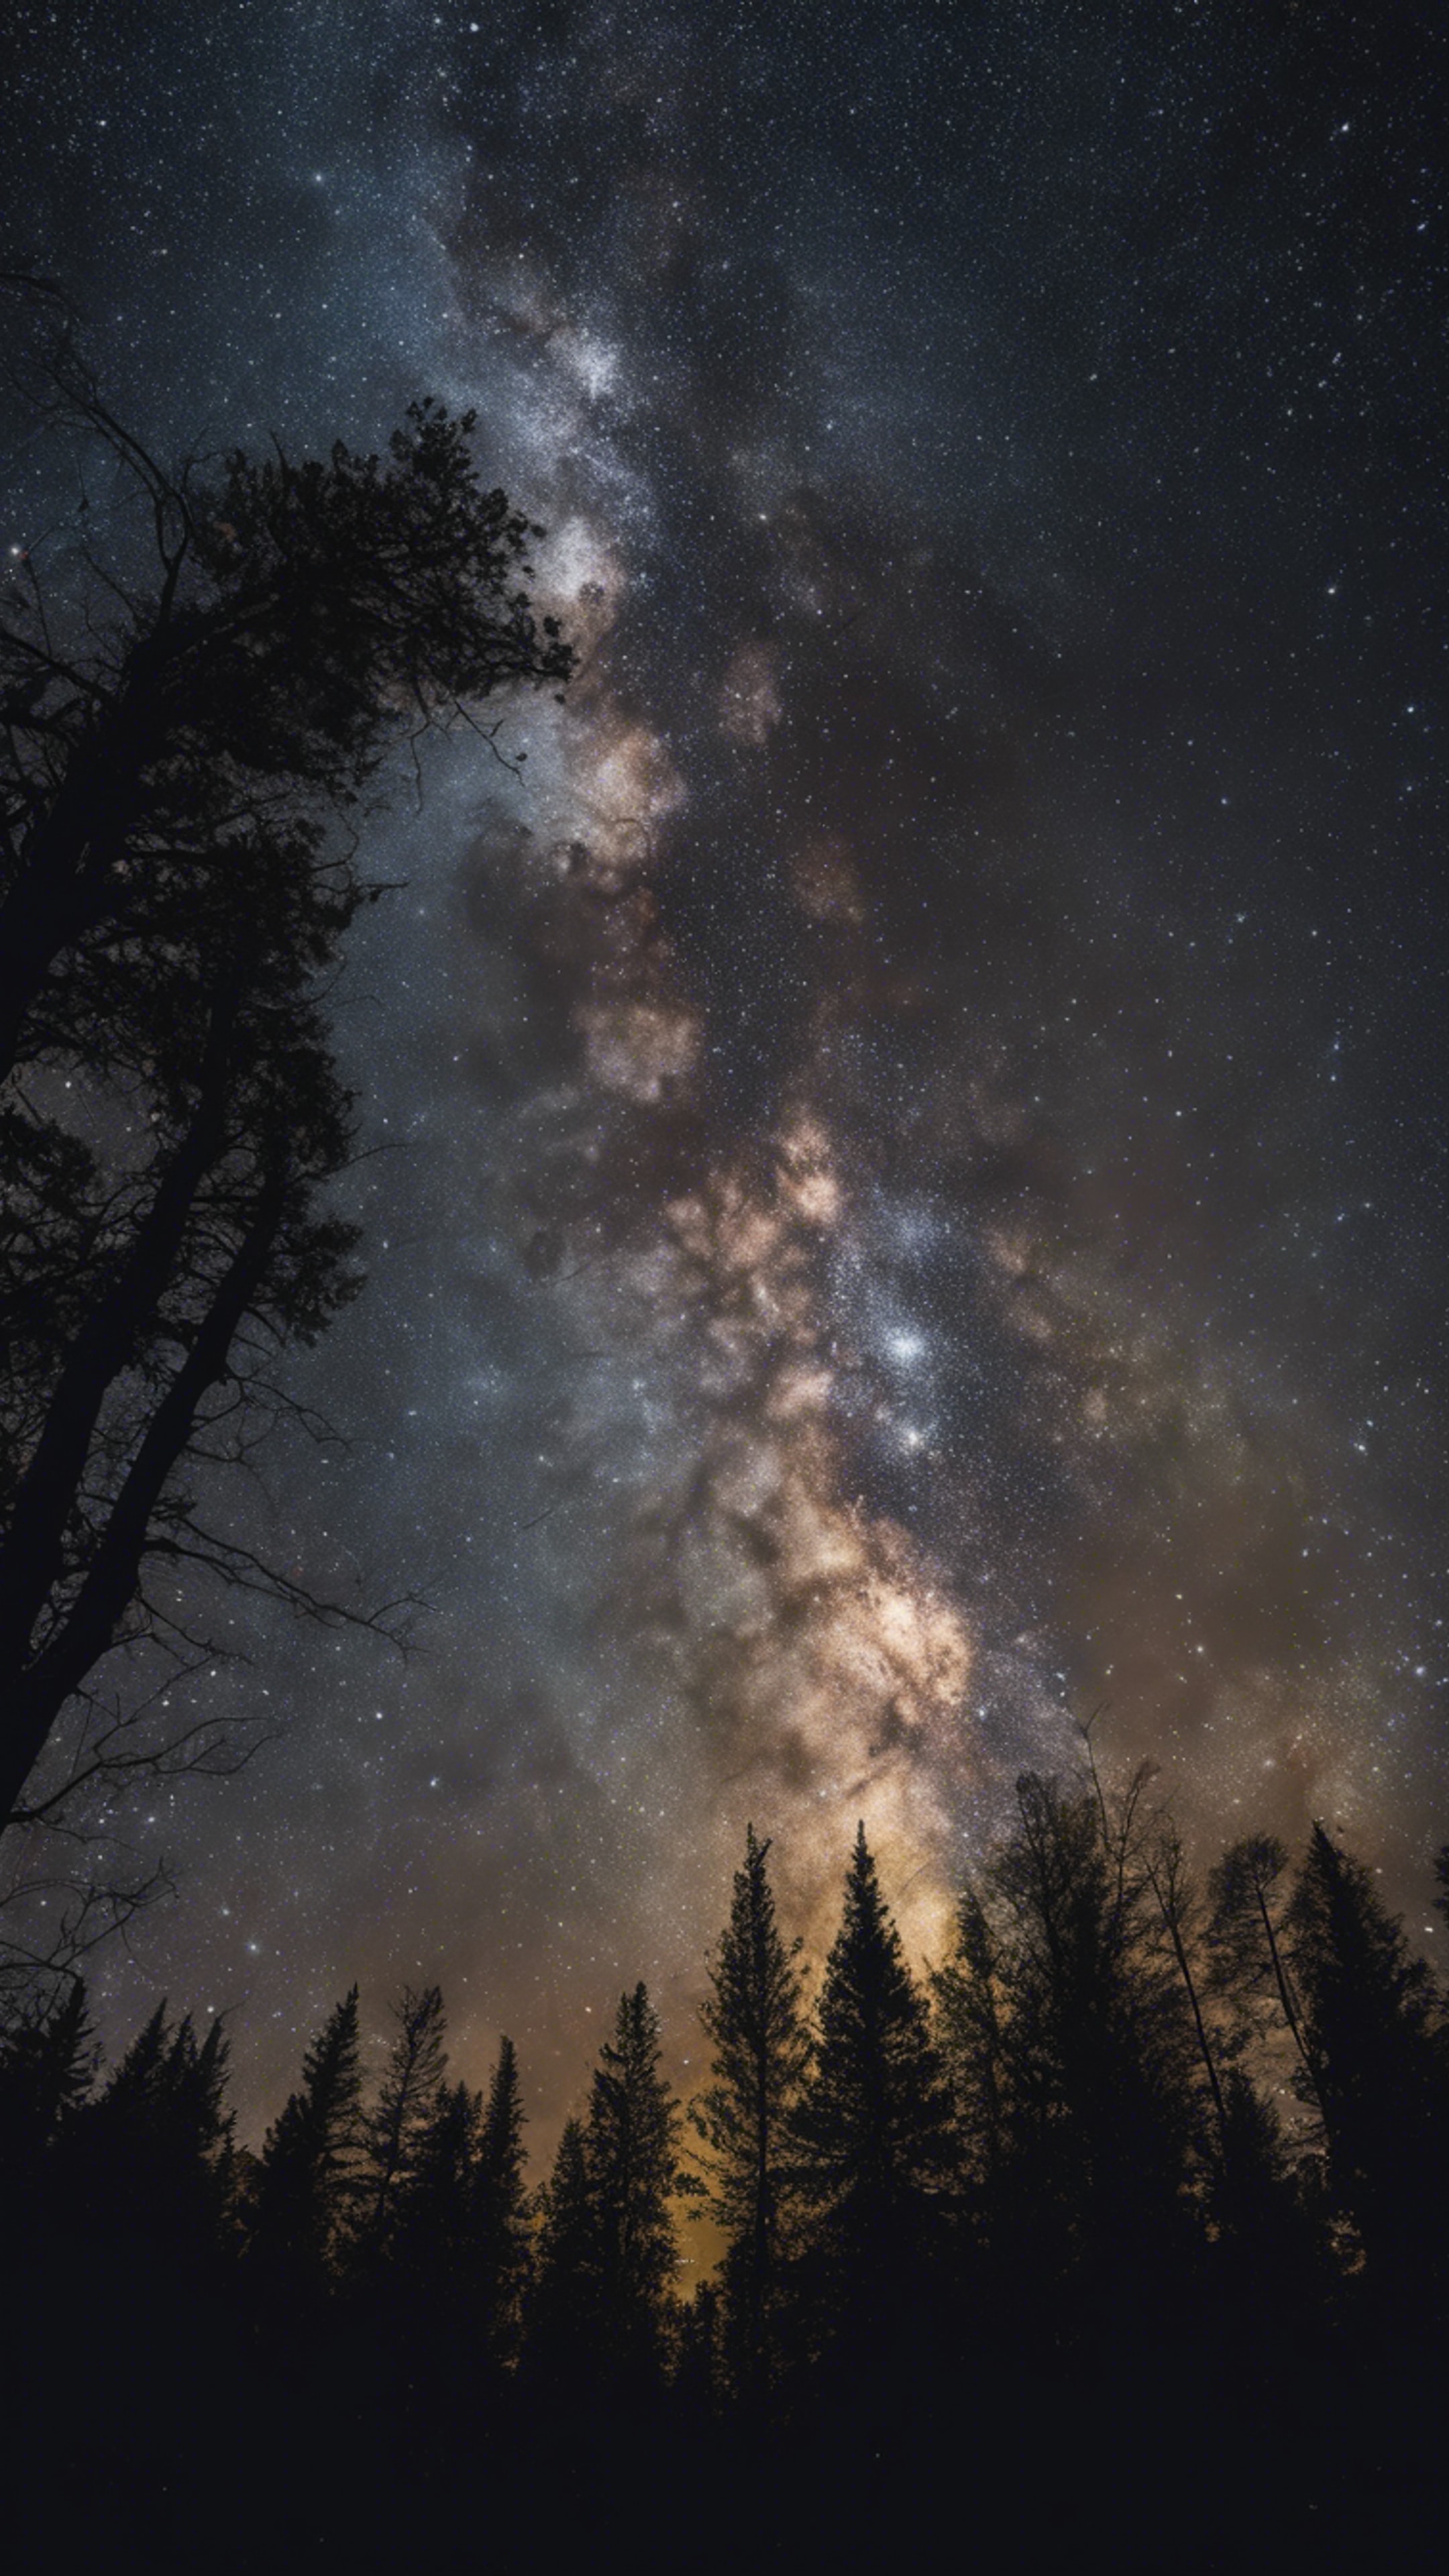 An astrophotograph showcasing the radiant Milky Way, against the contrast of a dark forest silhouette.壁紙[89bcc876a6704e52b700]